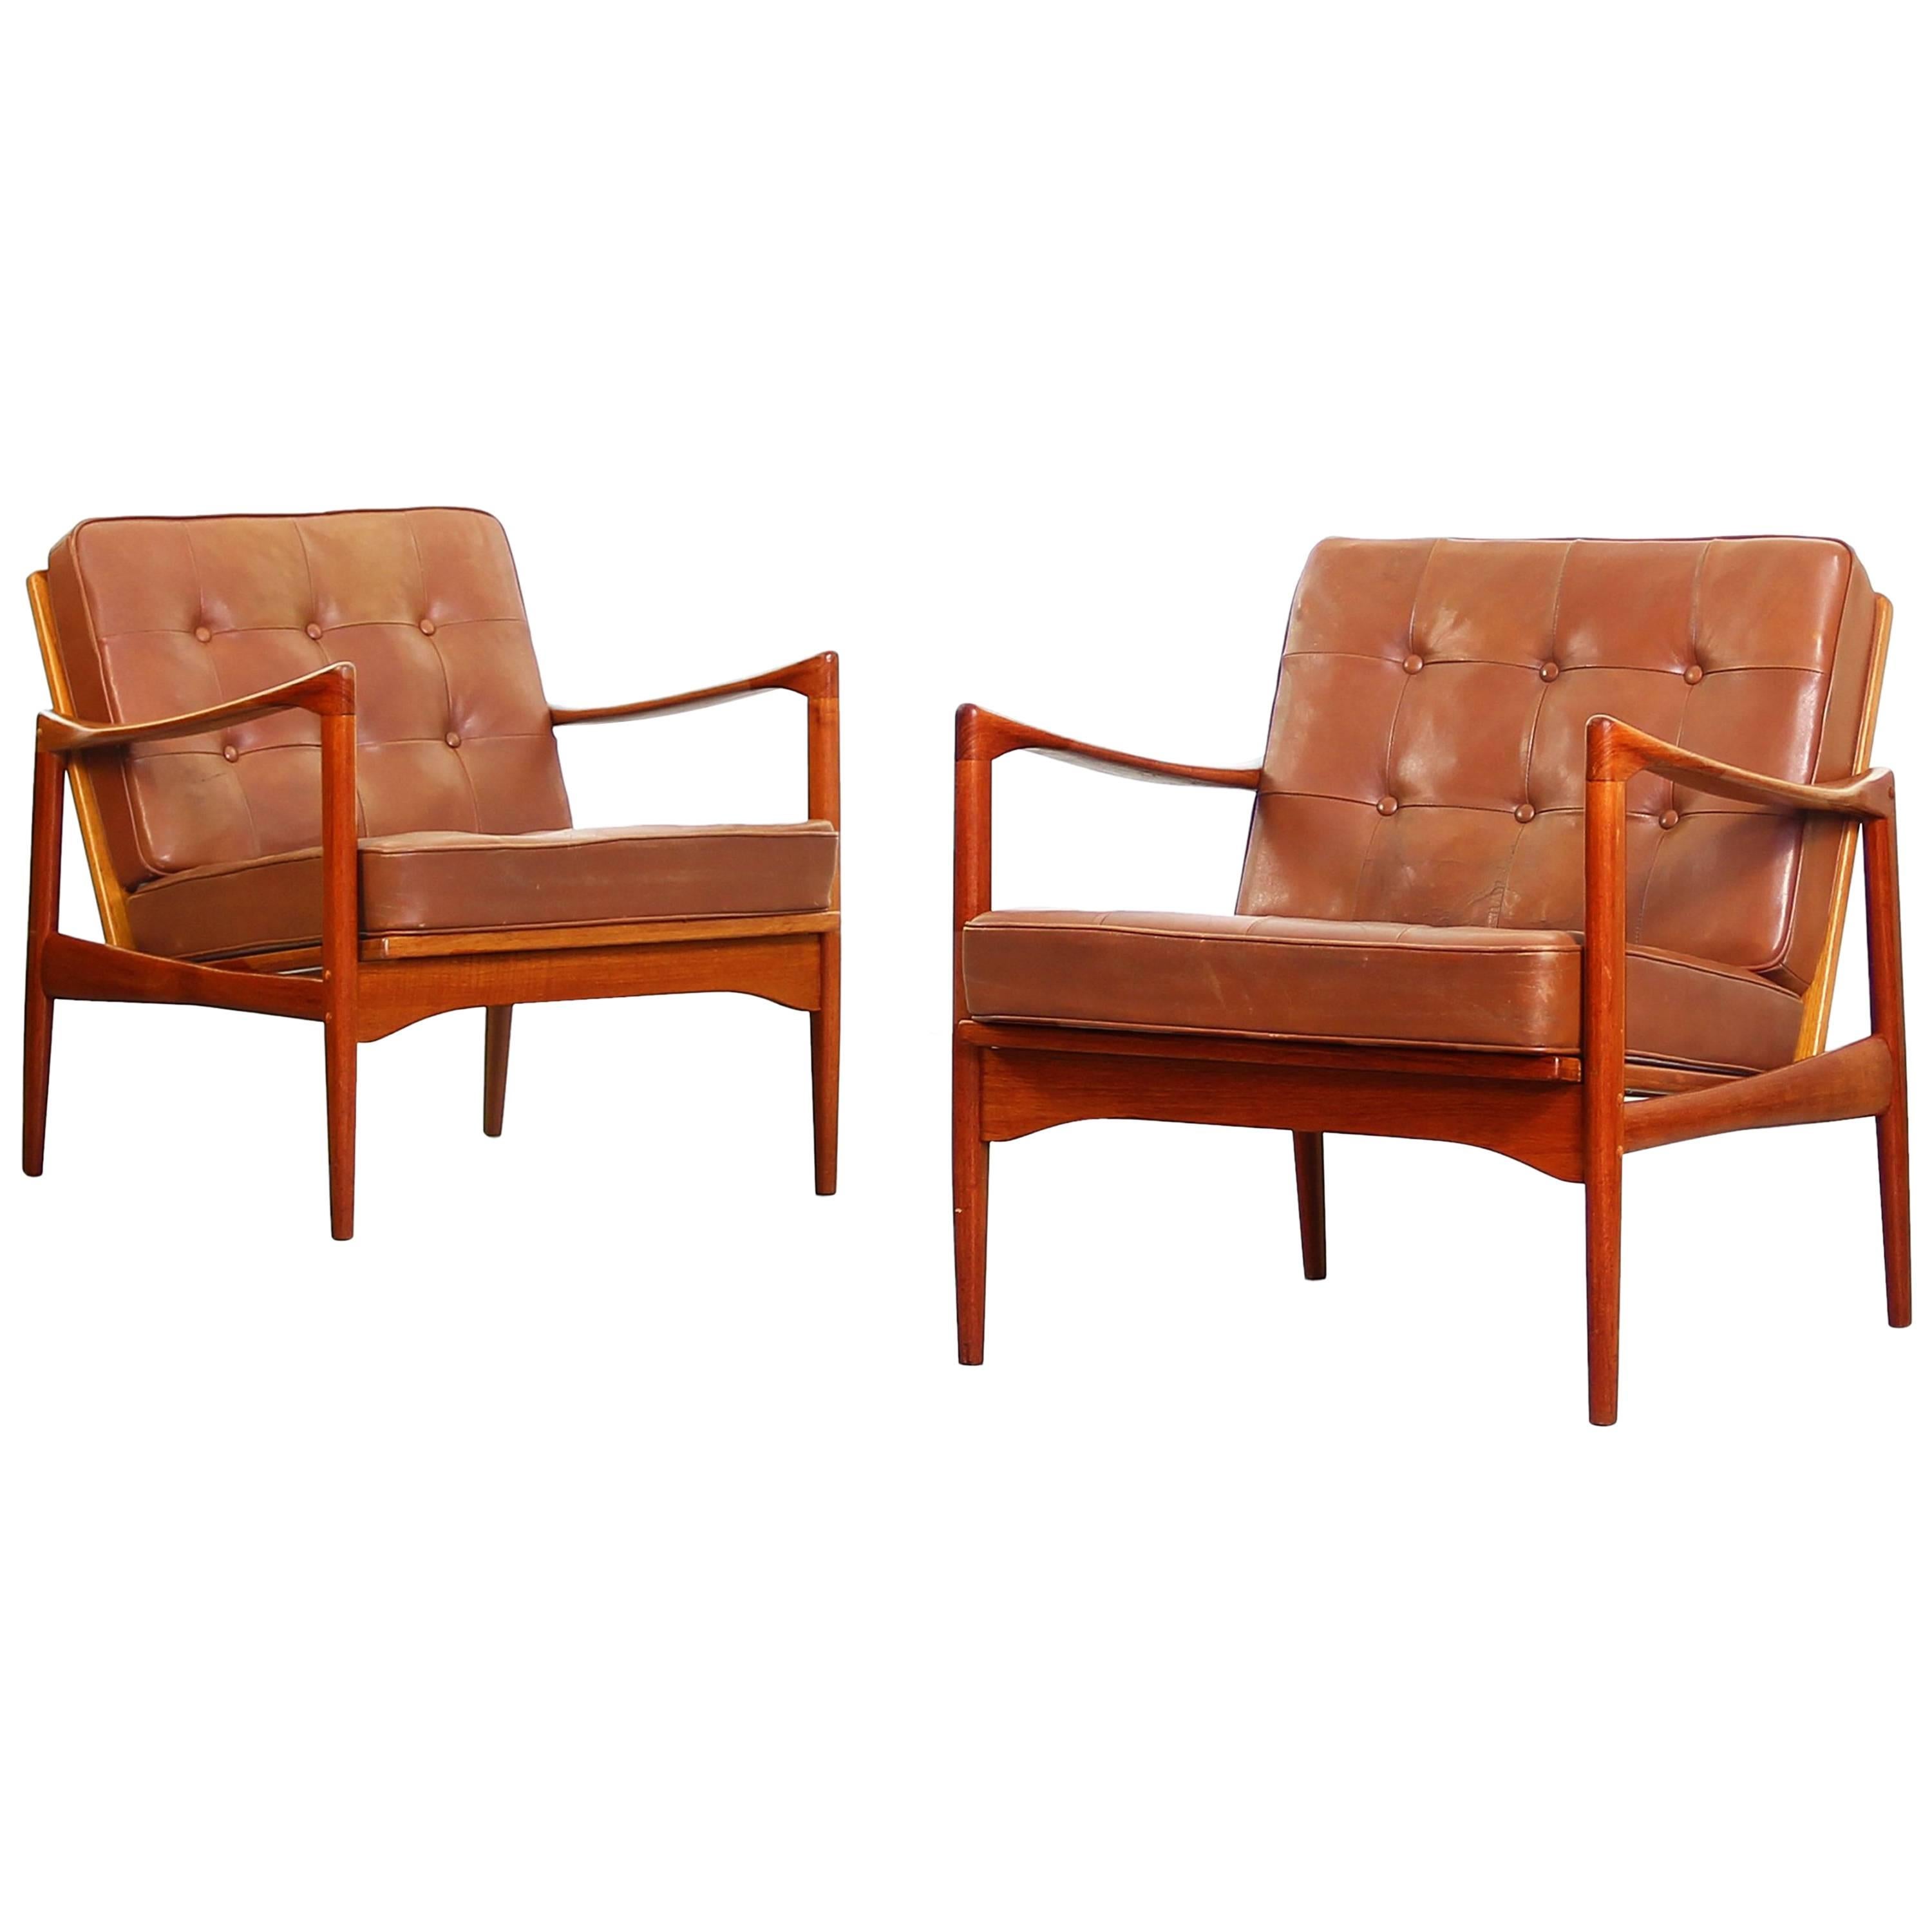 Beautiful Pair of Lounge Chairs by Ib Kofod Larsen for OPE Sweden